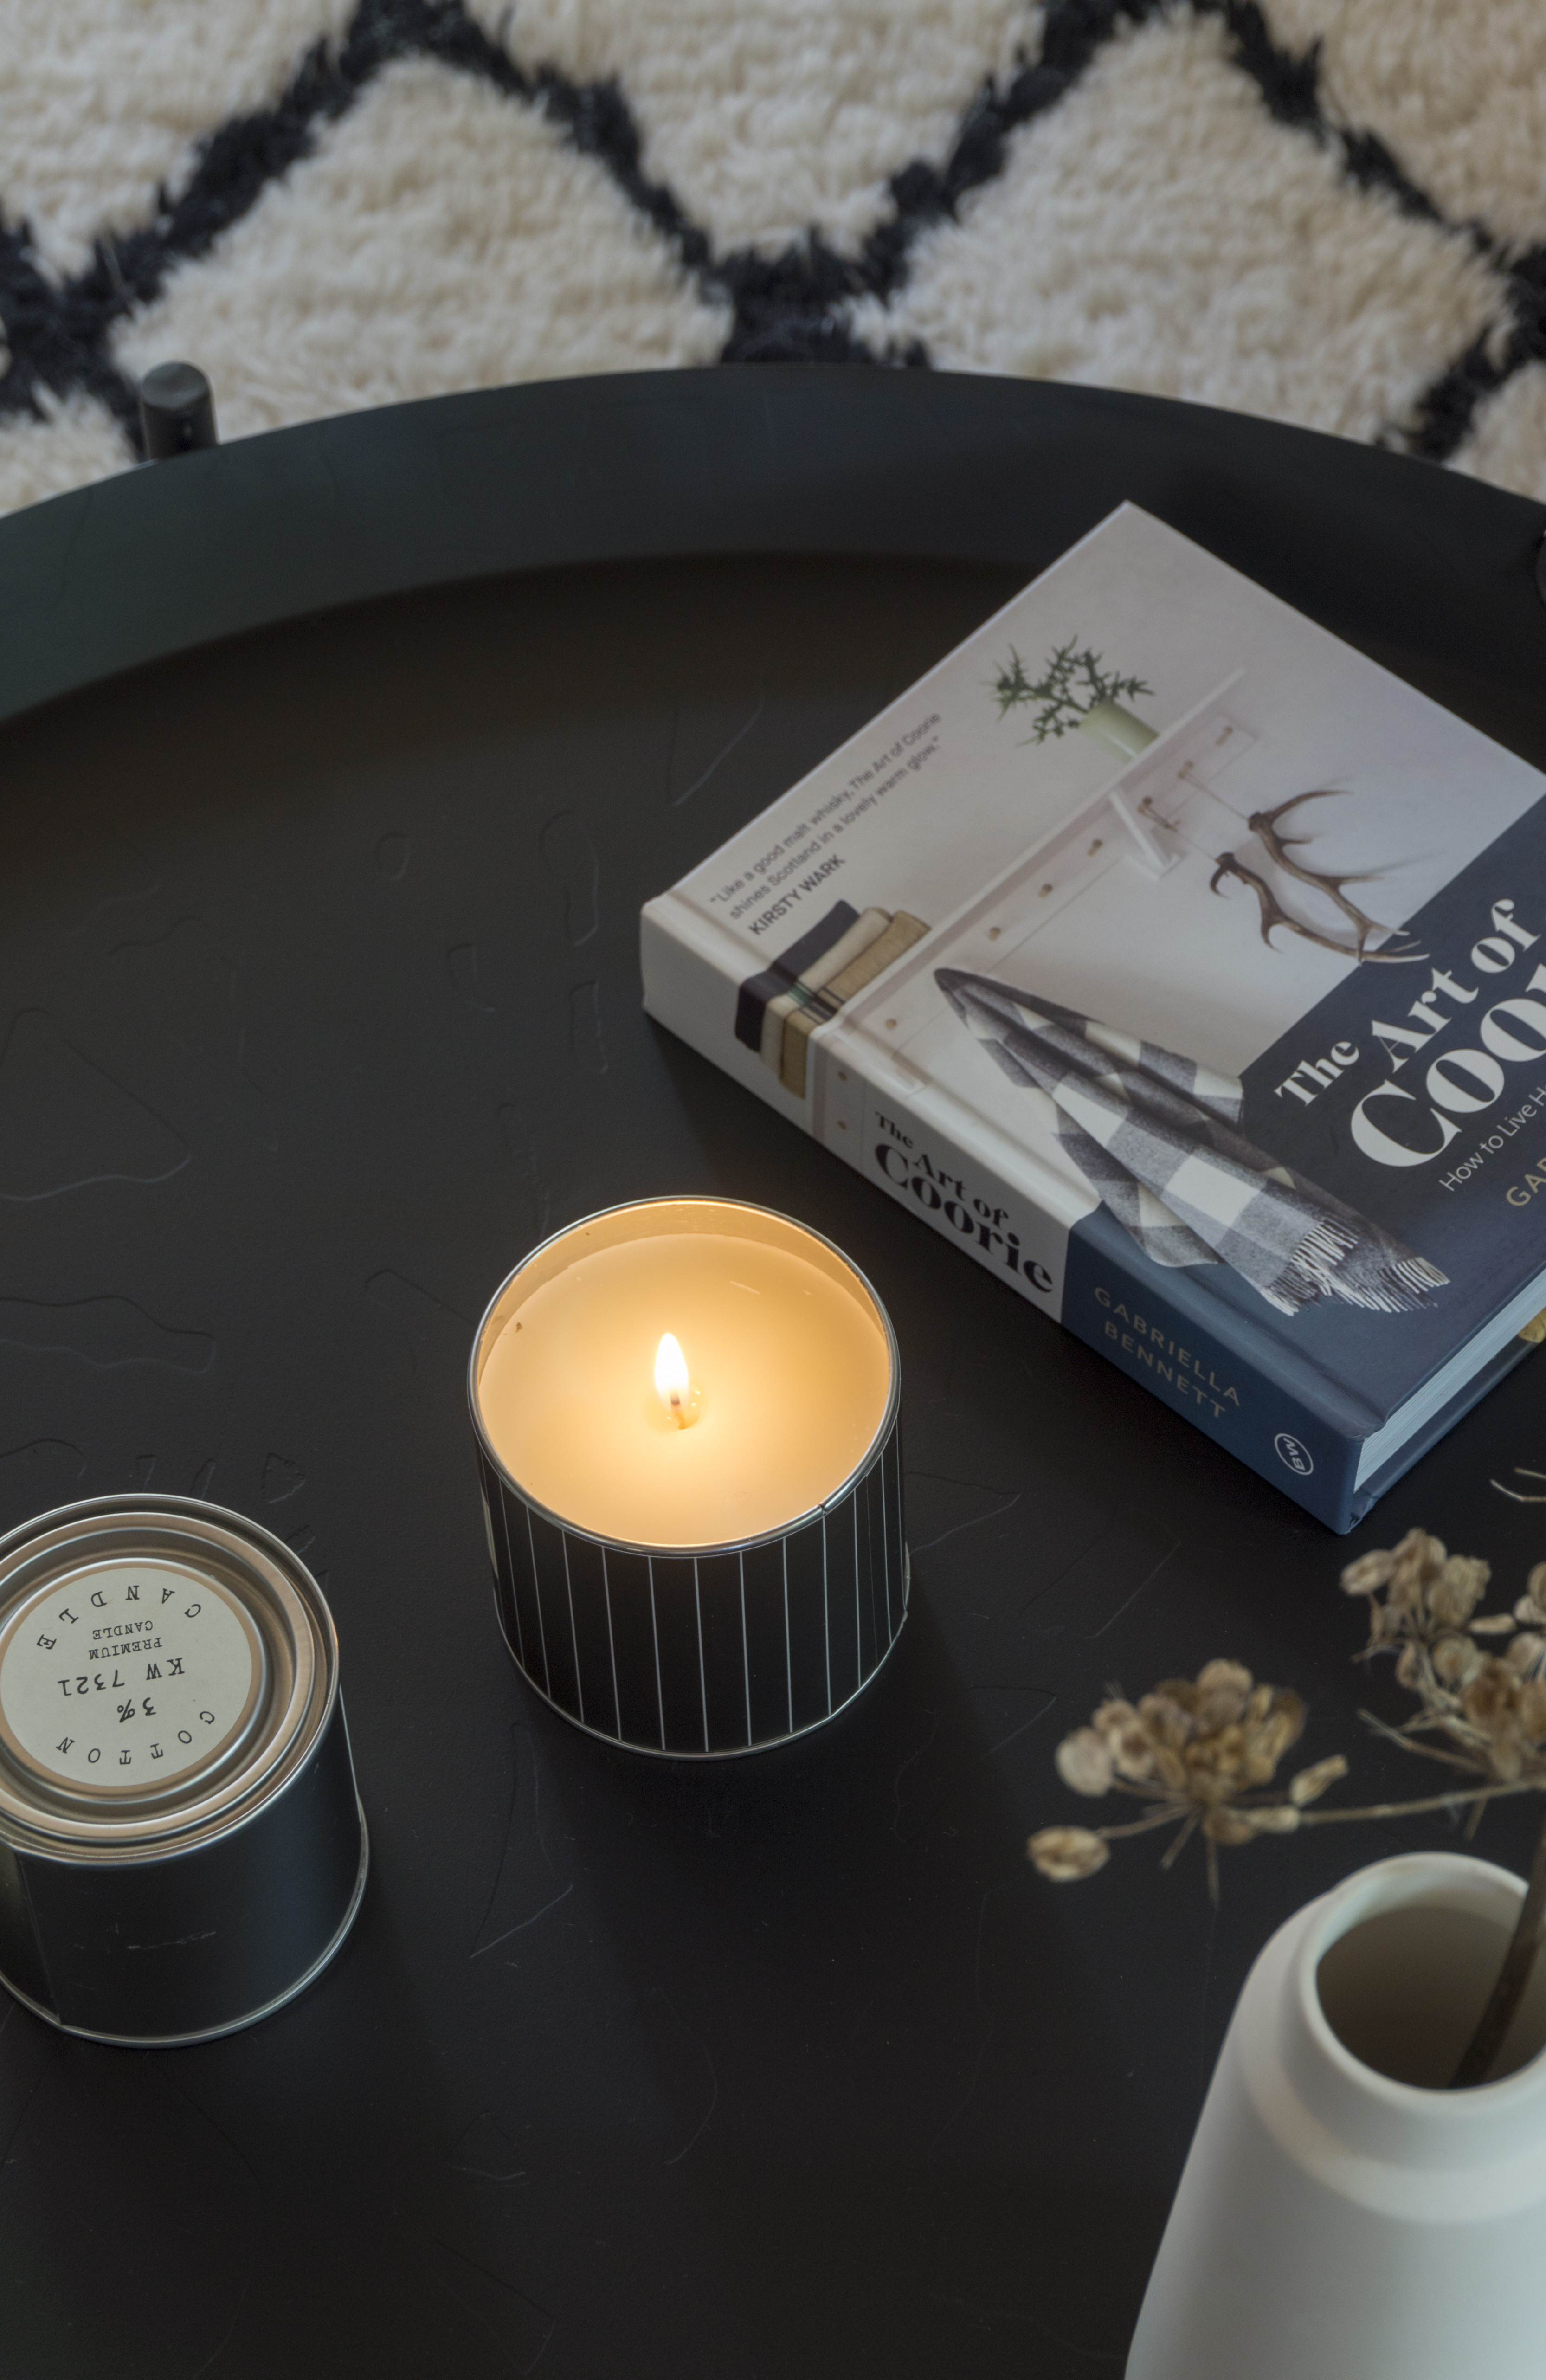 It's getting darker and it's time for cosy nights in